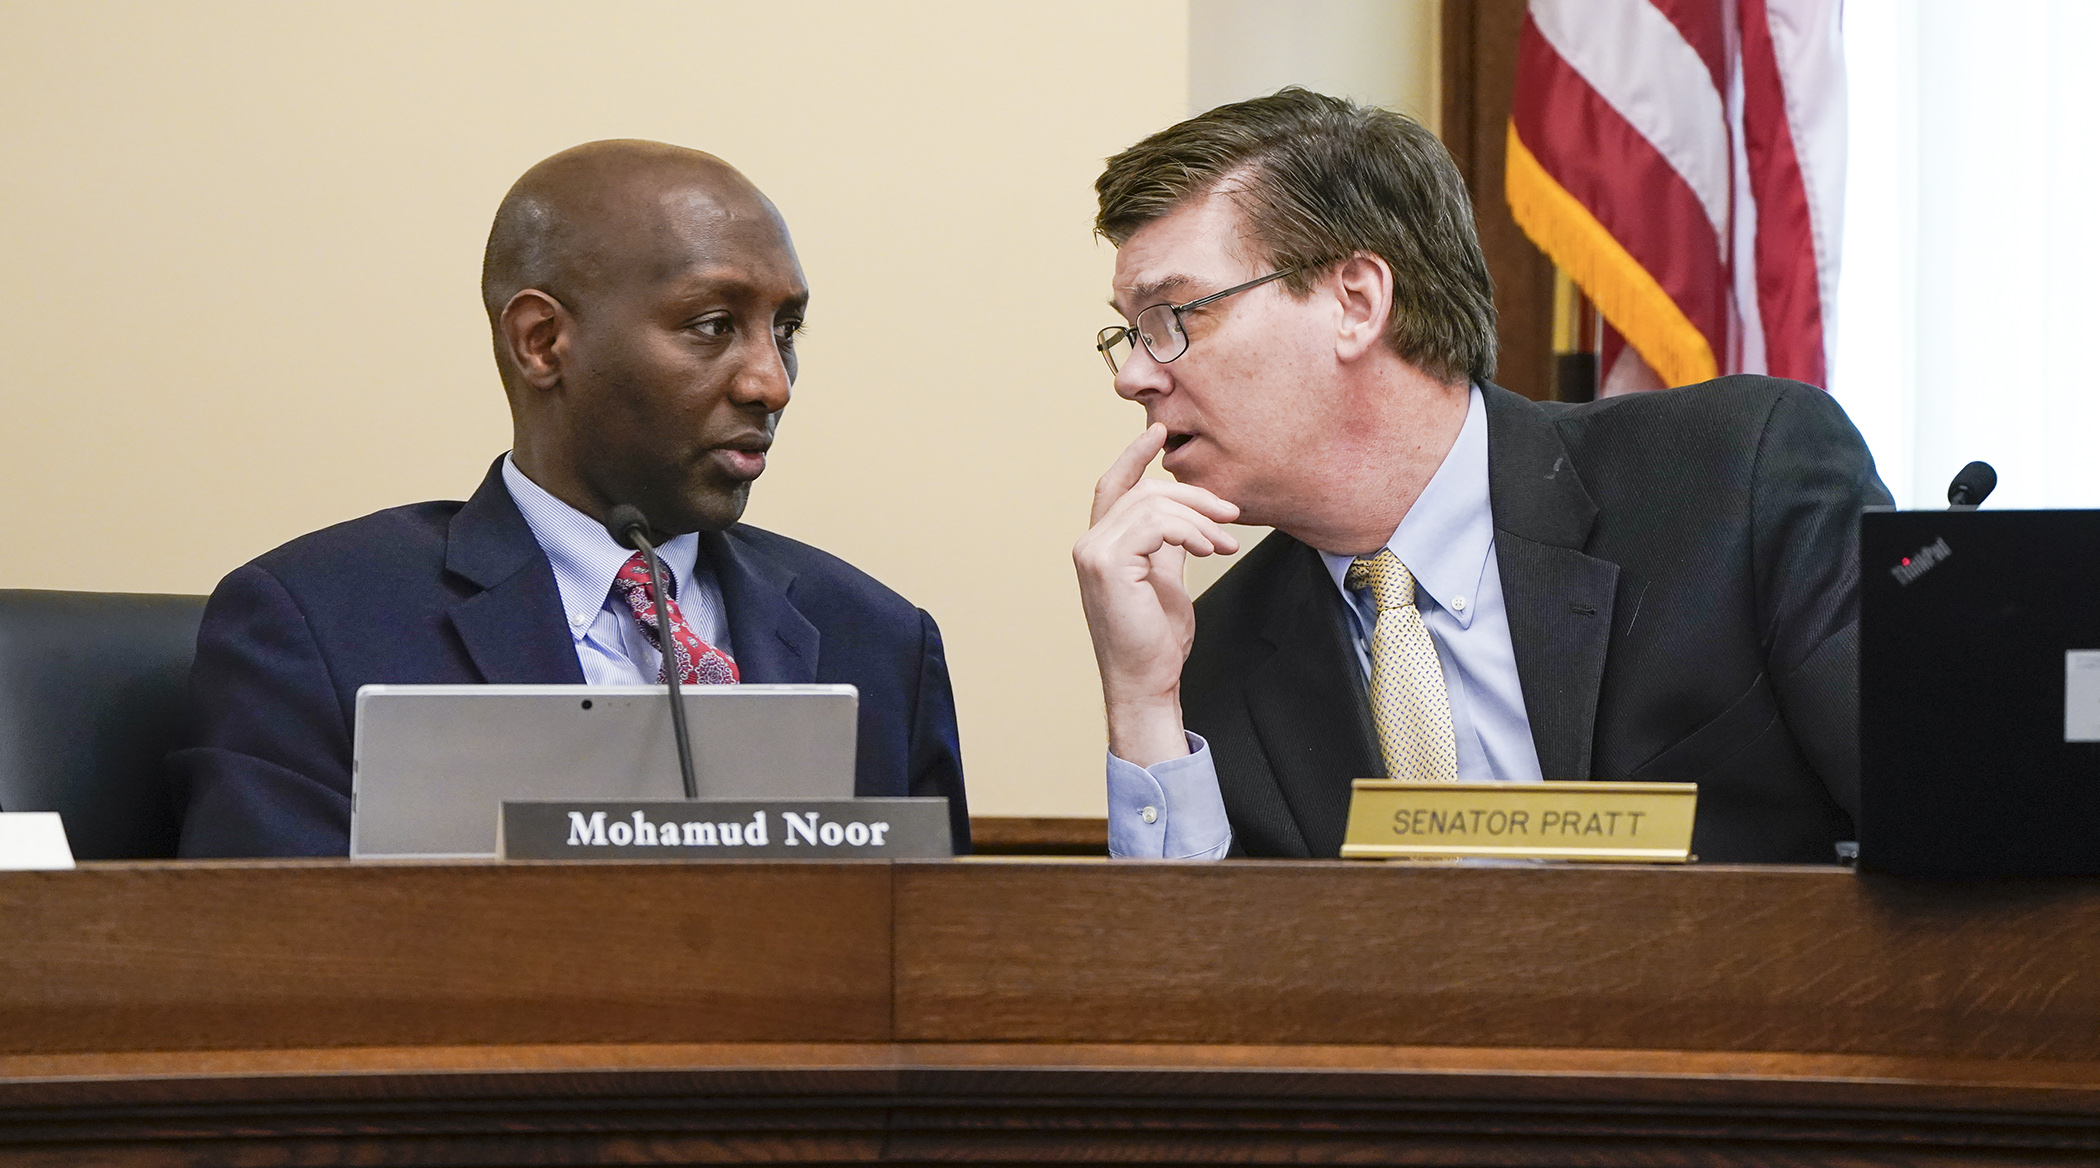 Rep. Mohamud Noor and Sen. Eric Pratt confer during the first meeting of the omnibus jobs, energy and commerce policy and supplemental appropriations conference committee May 12. (Photo by Paul Battaglia)